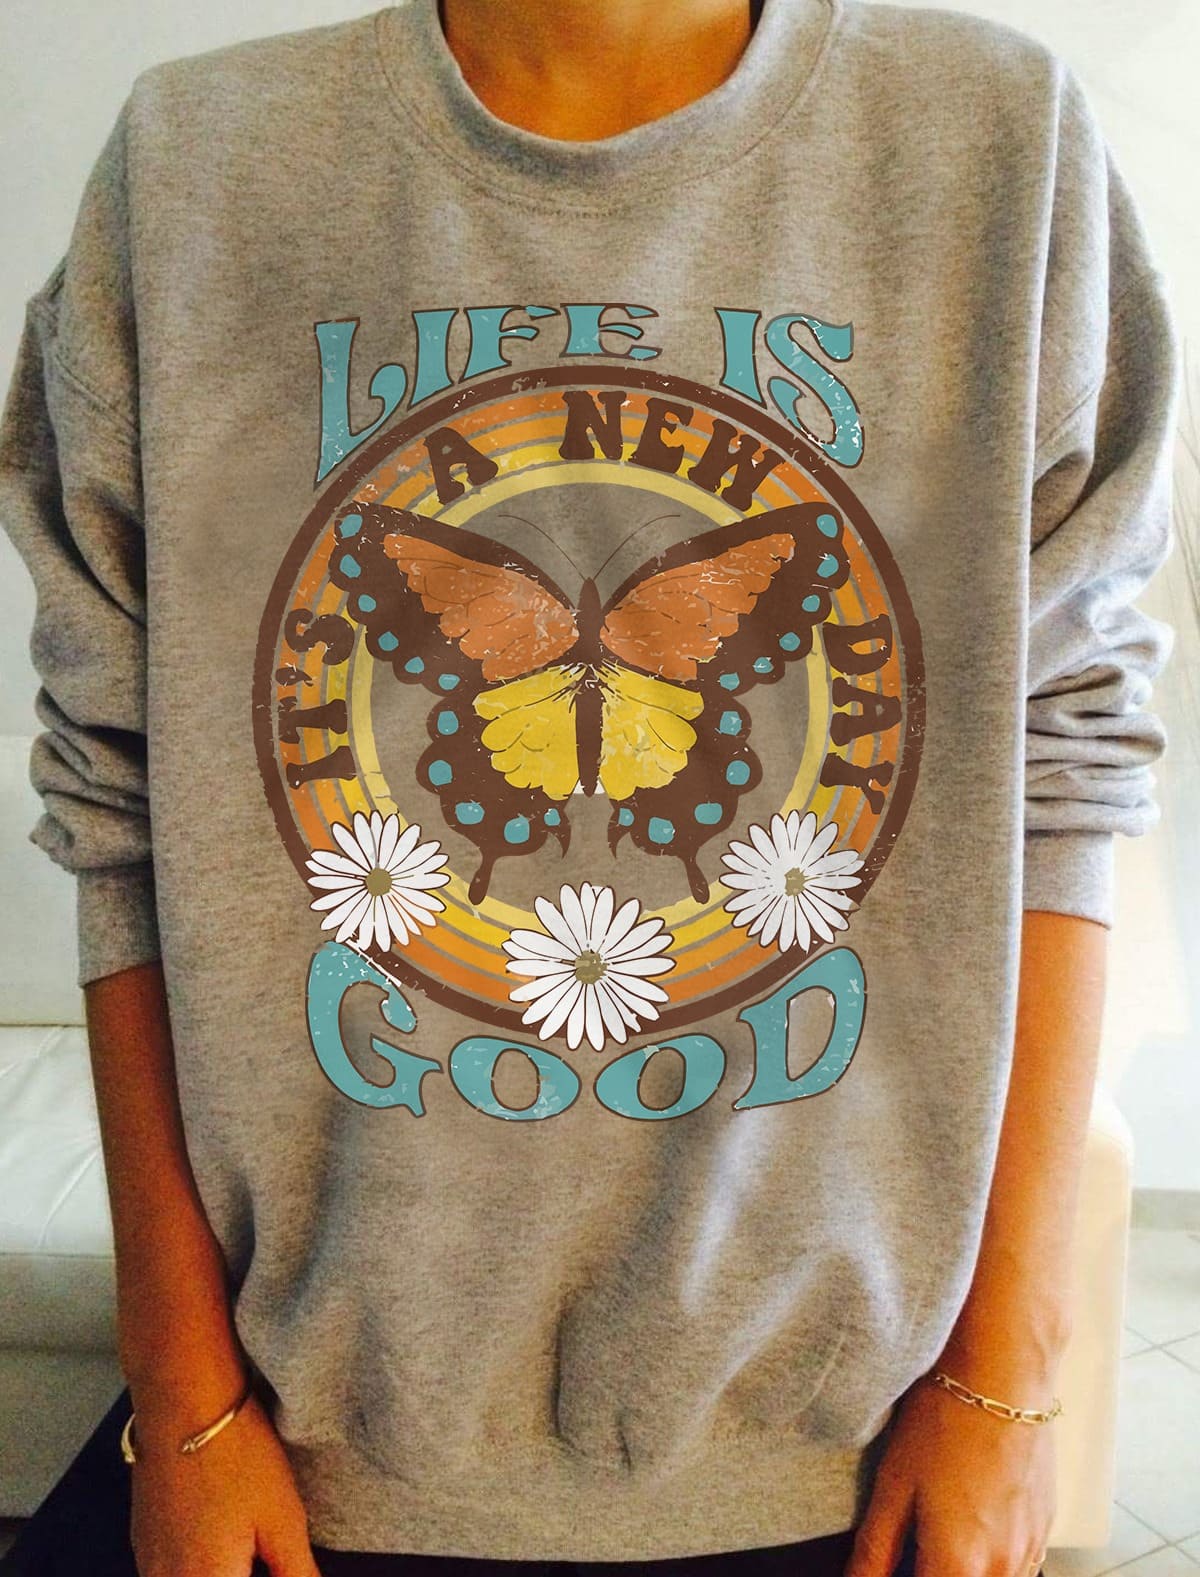 Life is good - It's a new day, butterfly new day, brighter tomorrow